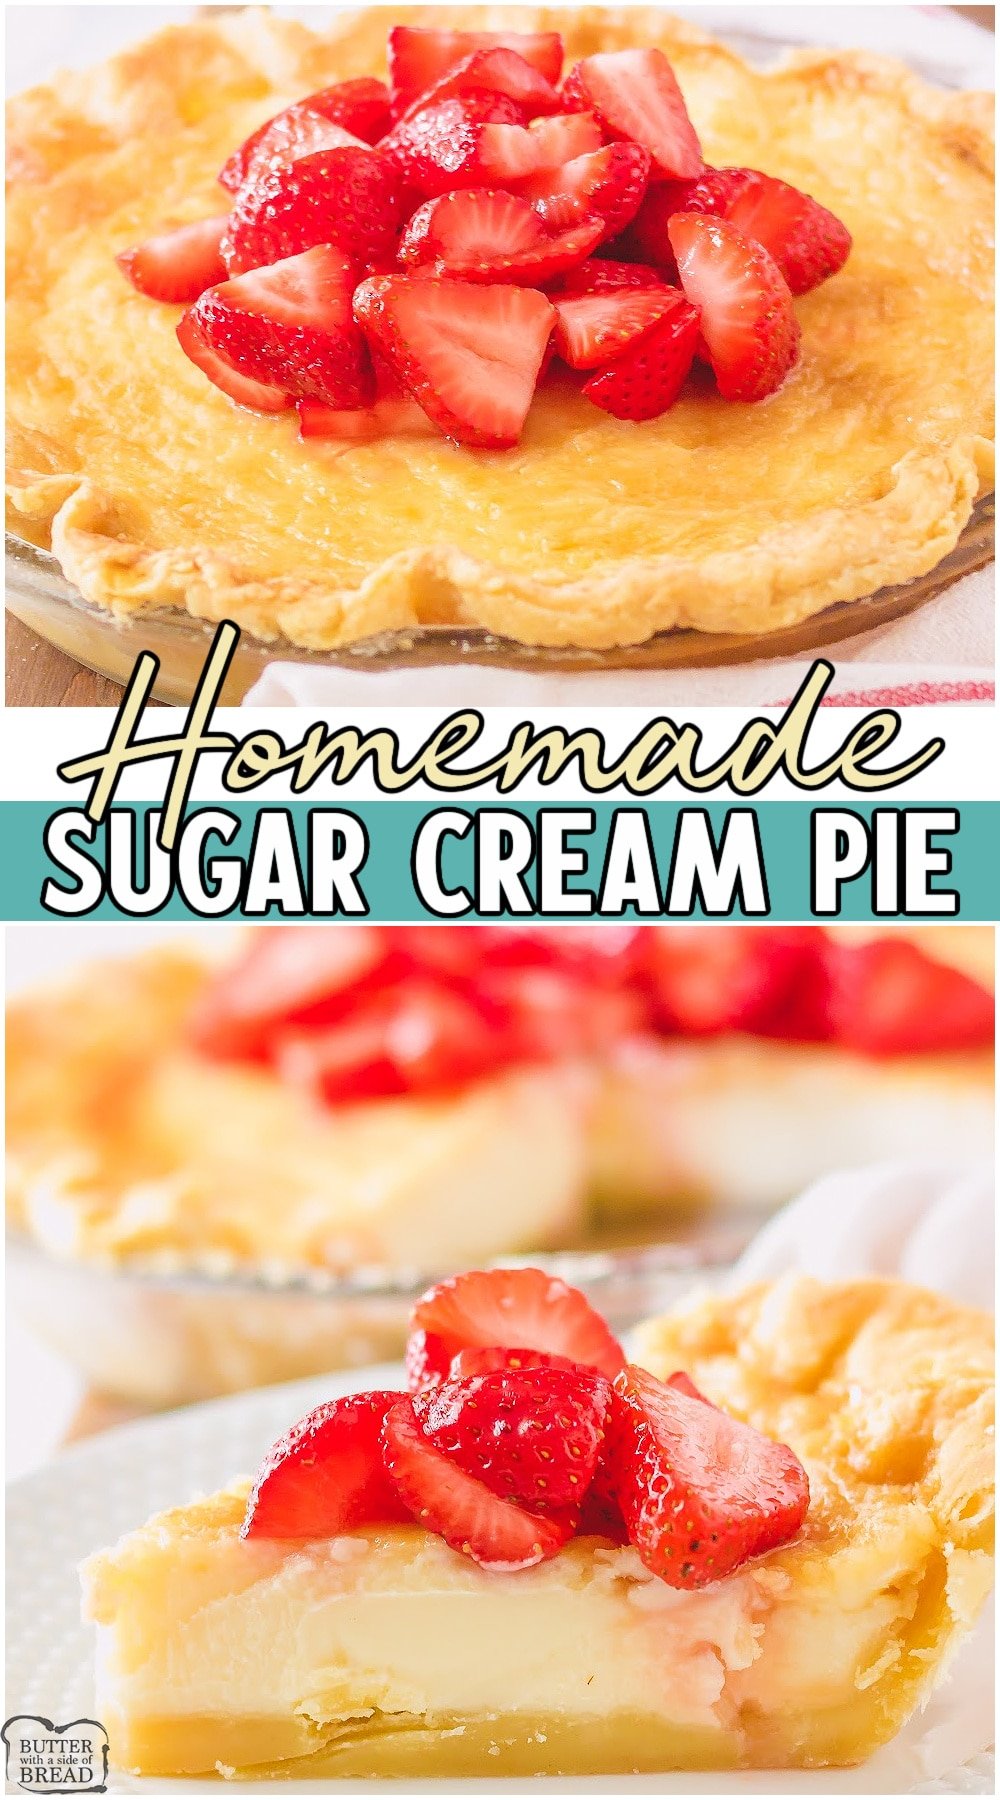 Sugar cream pie is a delicious custard pie made with butter, brown sugar, heavy cream and vanilla. Make this delicious custard pie from scratch today and watch everyone rave! #pie #sugarcream #custard #vanilla #baking #easyrecipe from BUTTER WITH A SIDE OF BREAD